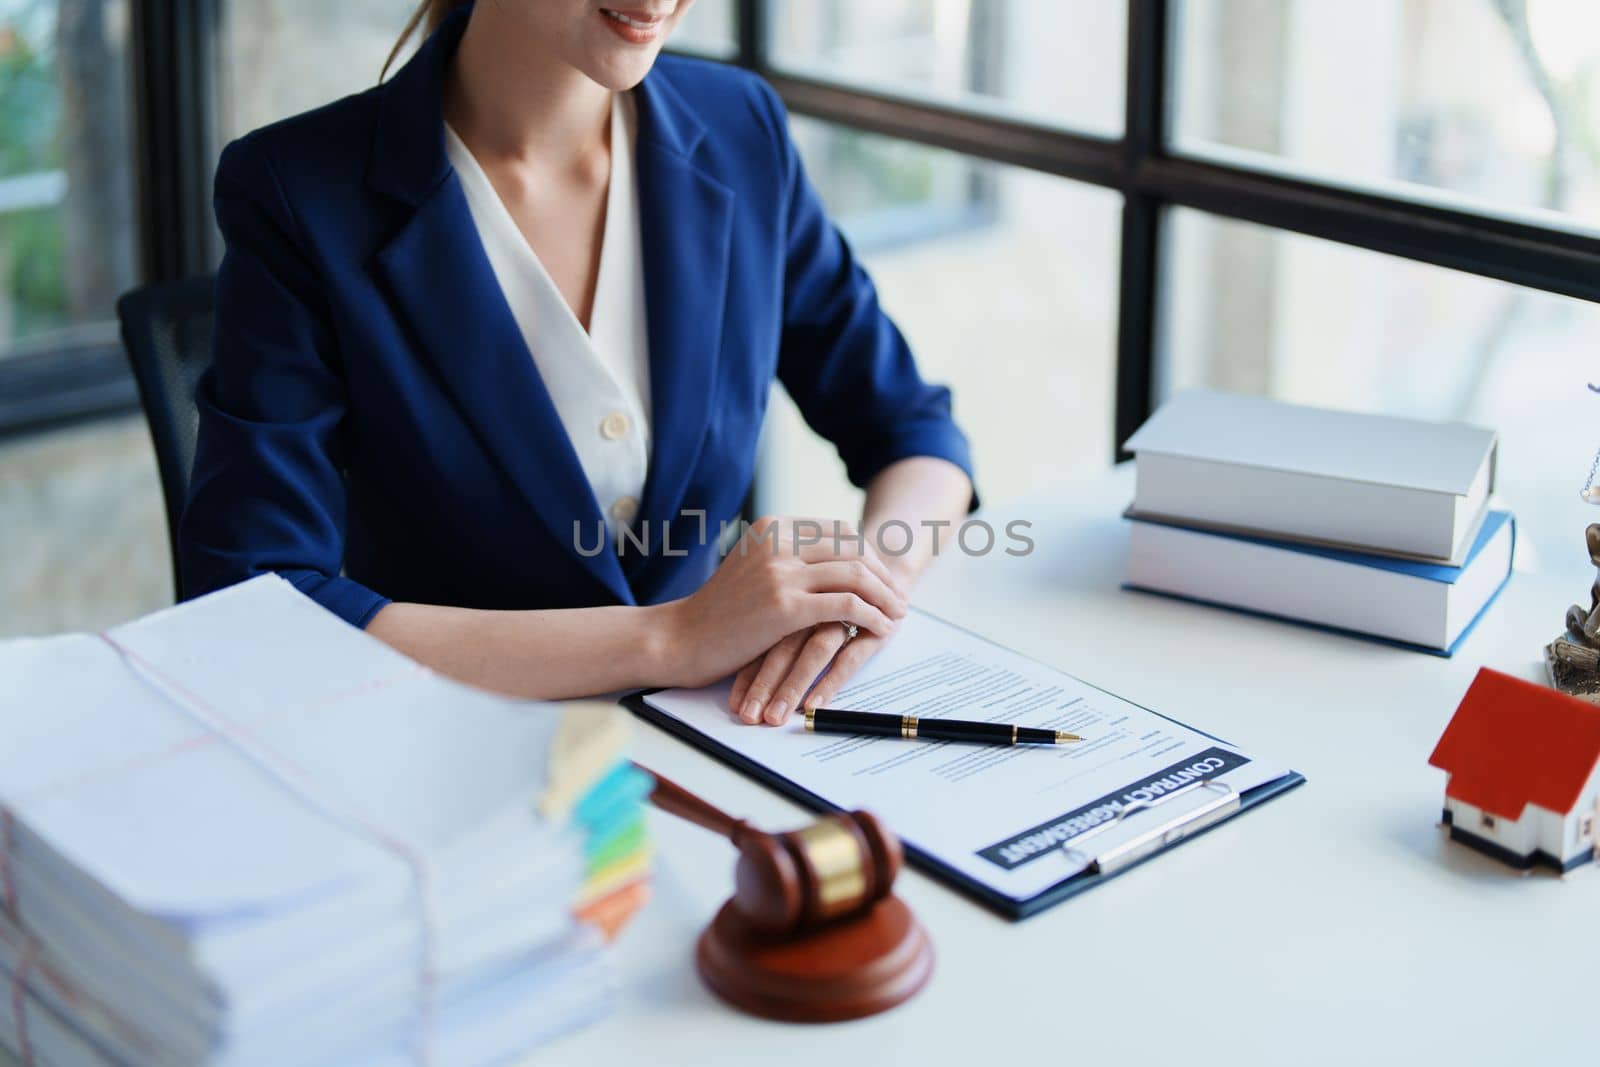 Law, Consultation, Agreement, Contract, Concept Attorney or Lawyer is sitting and accepting complaints from clients for home and land matters in court. by Manastrong